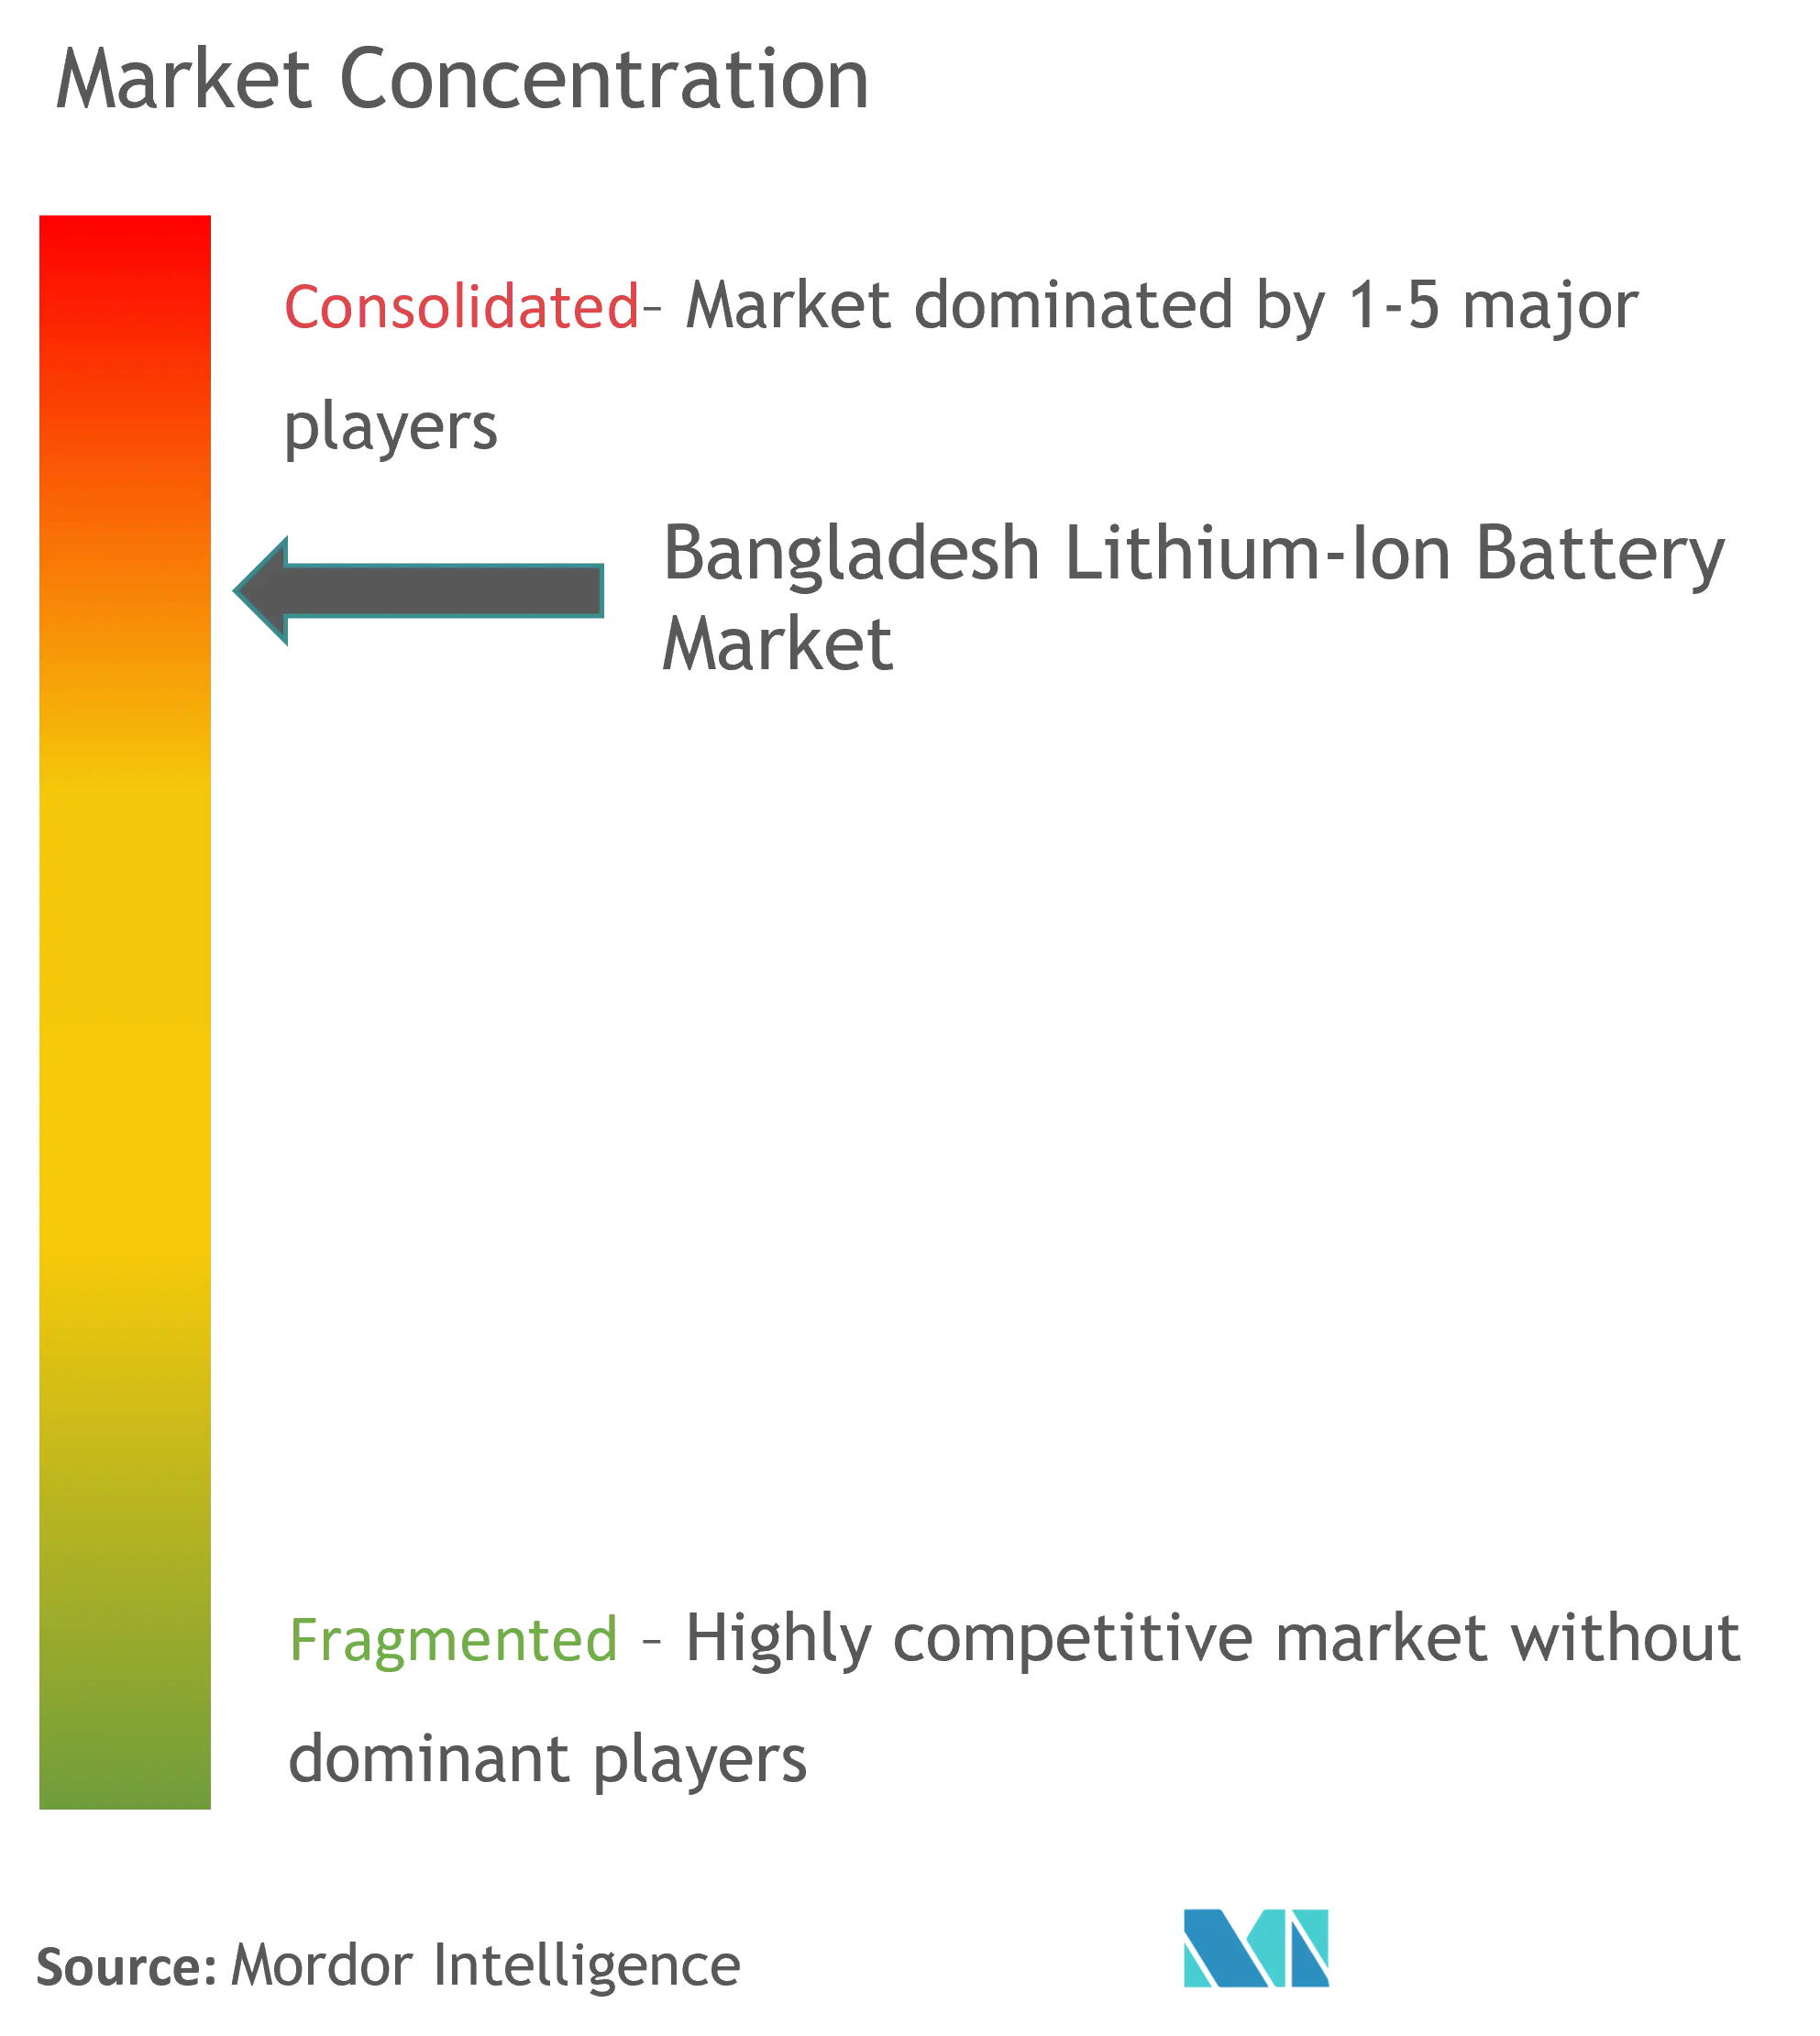 Bangladesh Lithium-ion Battery Market Concentration